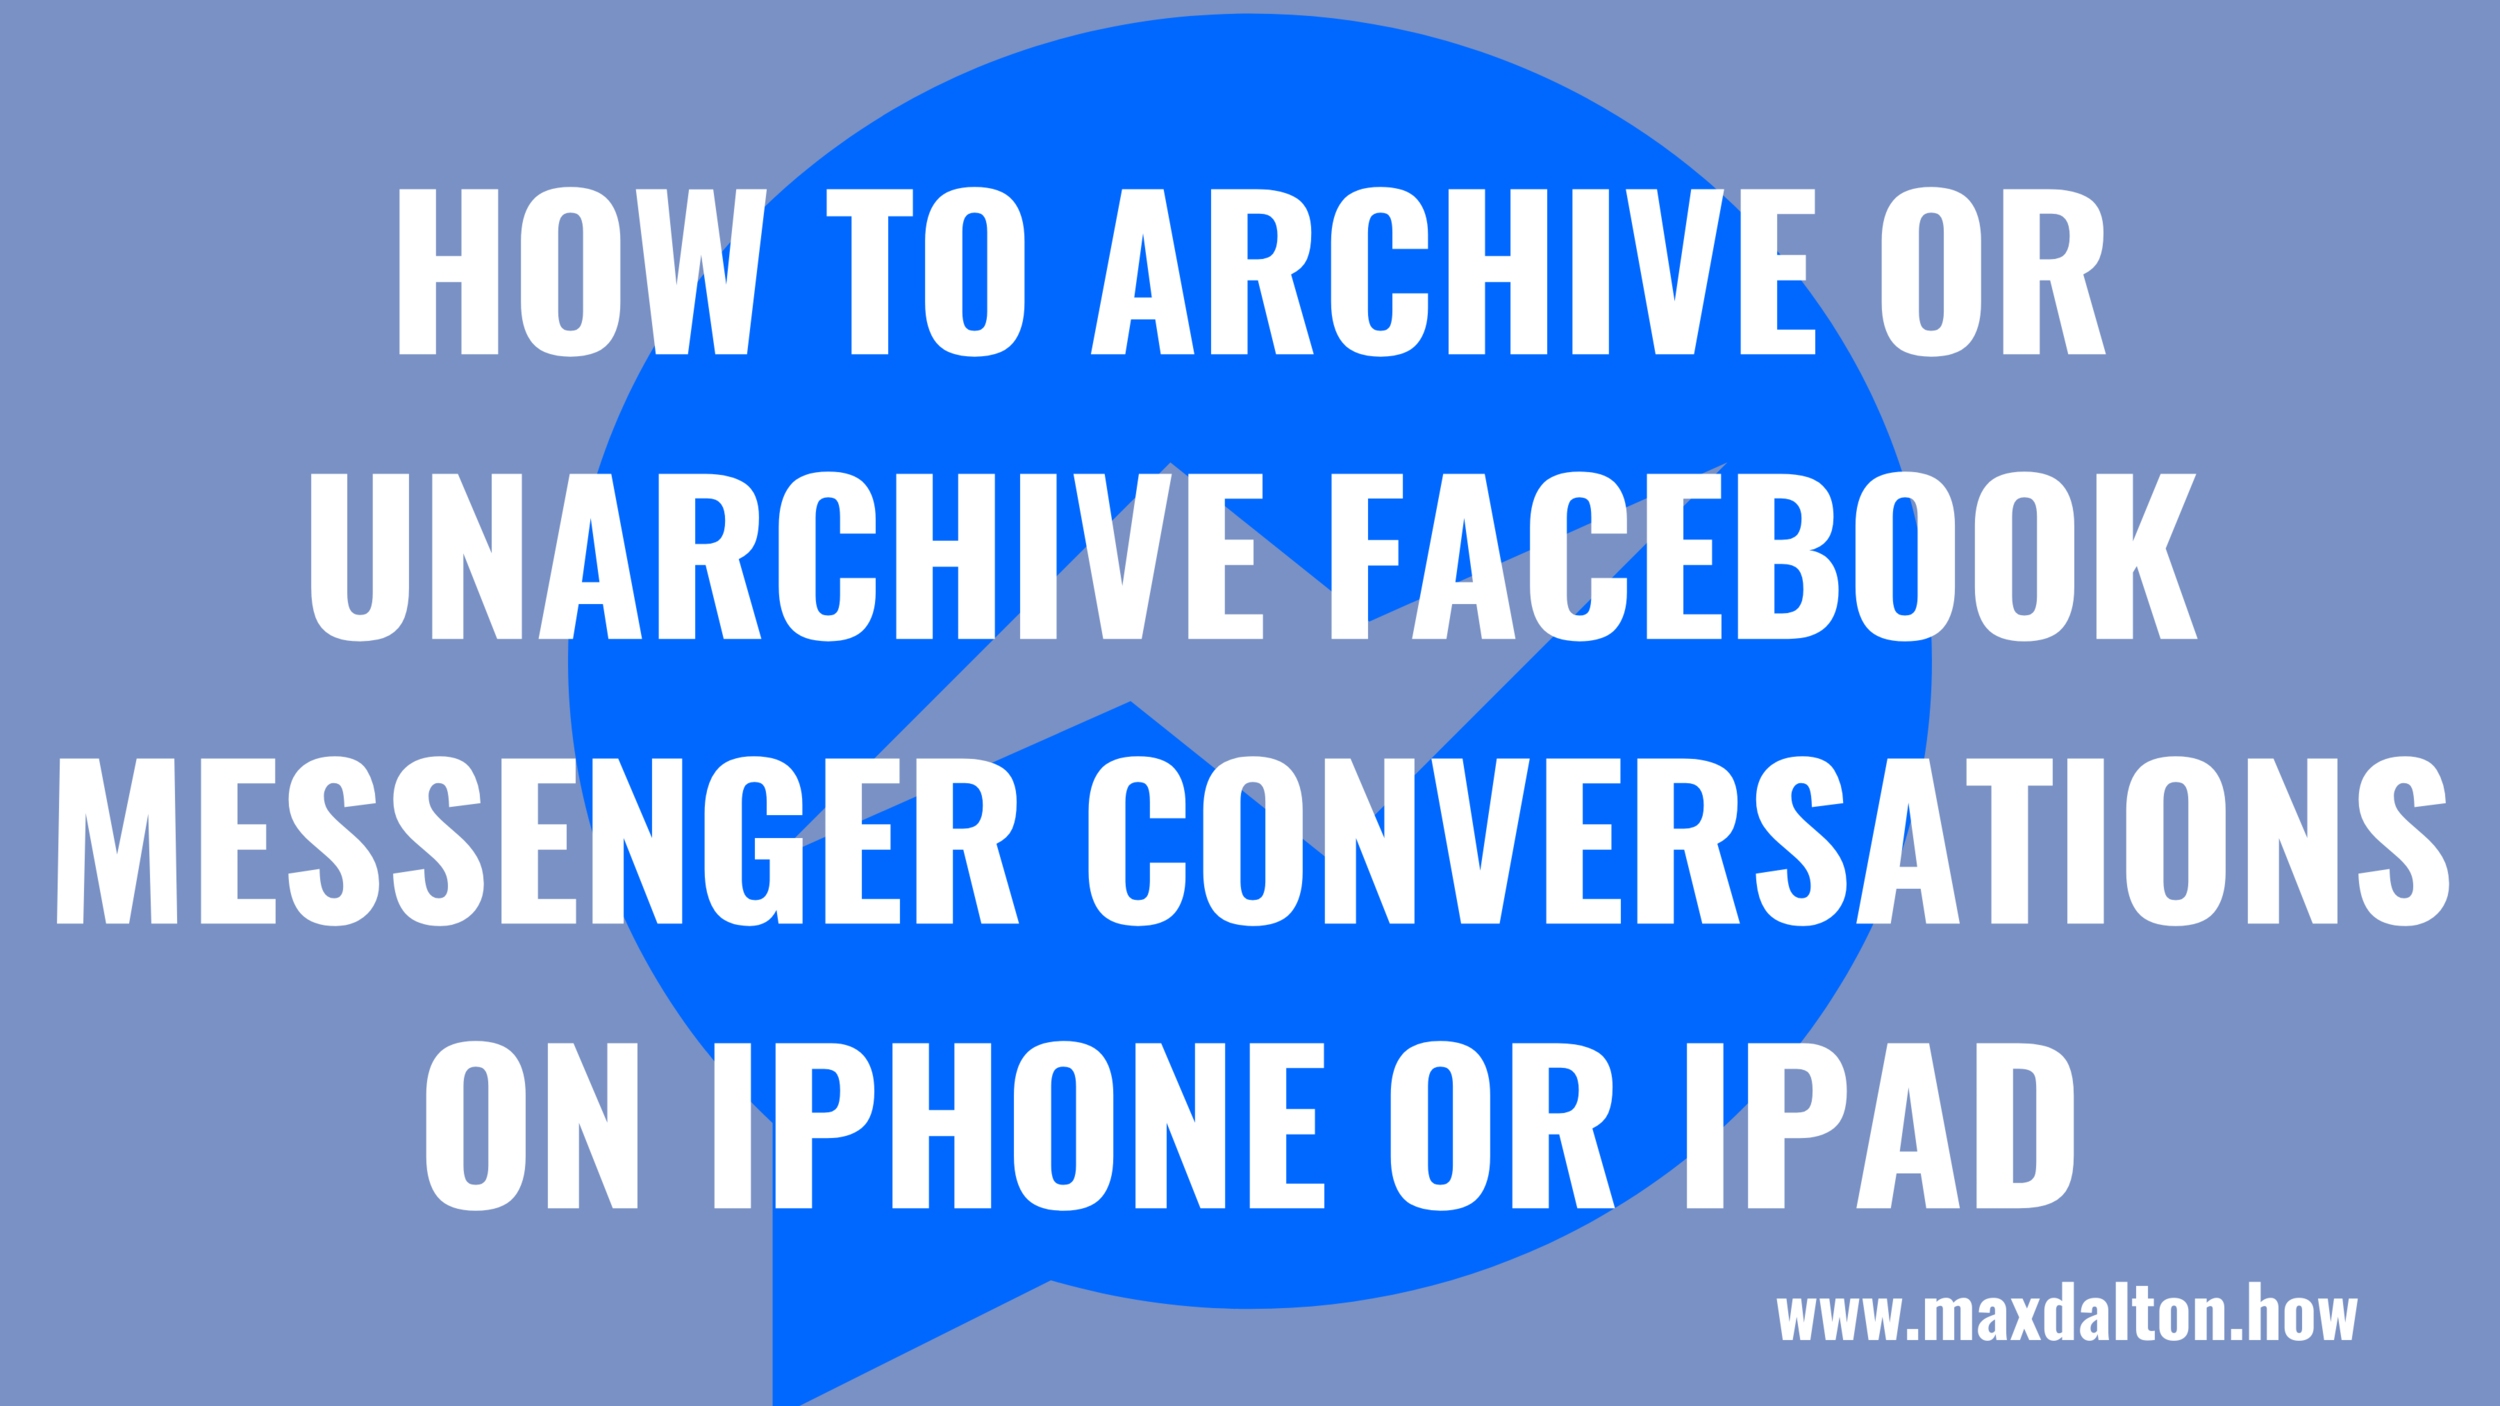 How to Archive and Unarchive Facebook Messenger Conversations on